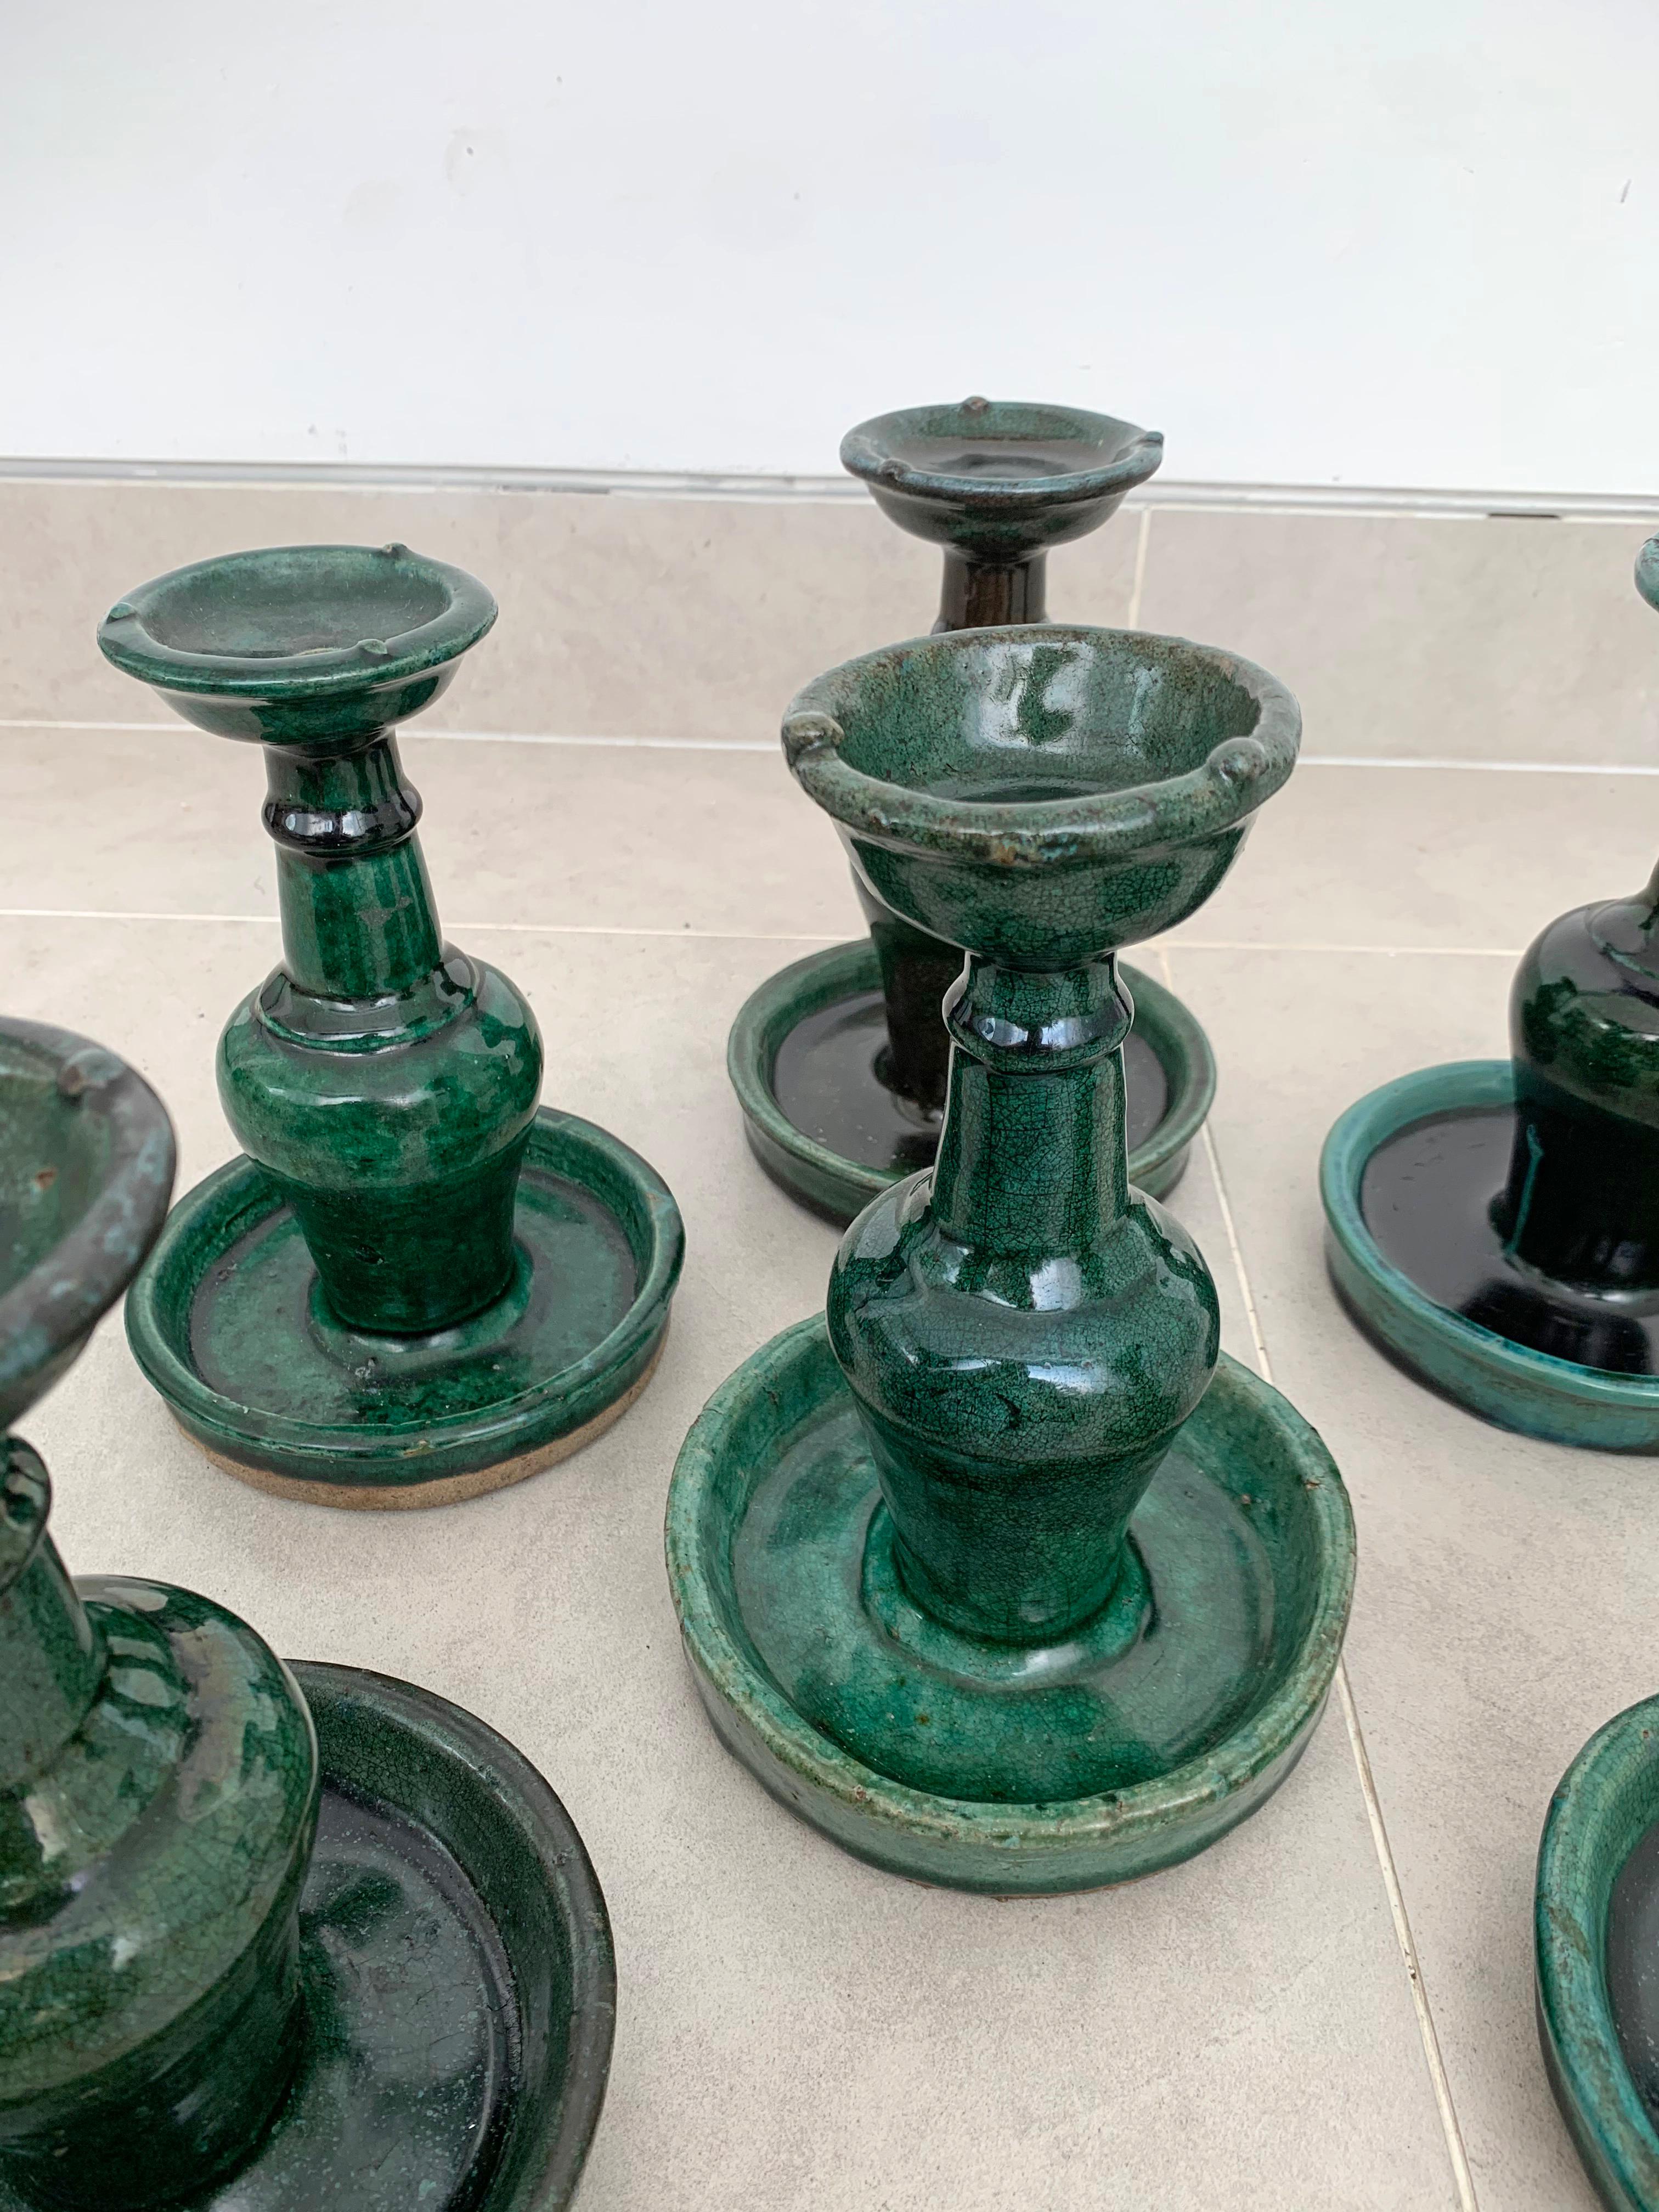 20th Century Chinese 'Shiwan' Candleholder / Oil Lamp Set of 6, Green-Glazed, c. 1900 For Sale